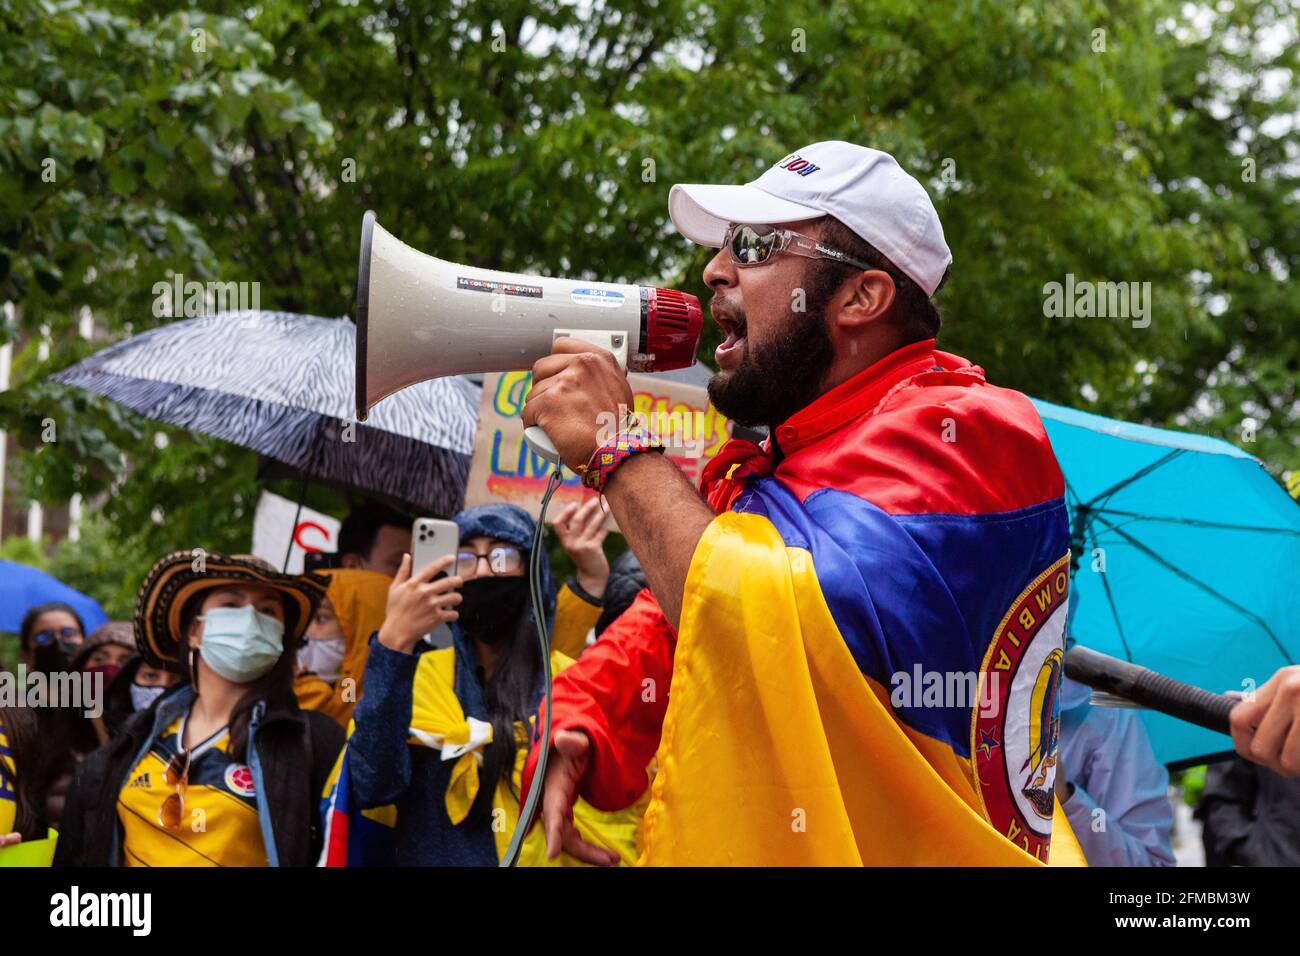 Washington DC, USA. 07th May, 2021. A man fires up the crowd during a protest against the Colombian government's violent, disproportionate response to peaceful protests by unarmed citizens over taxes, equality, and response to the coronavirus pandemic. Credit: Allison Bailey/Alamy Live News Stock Photo